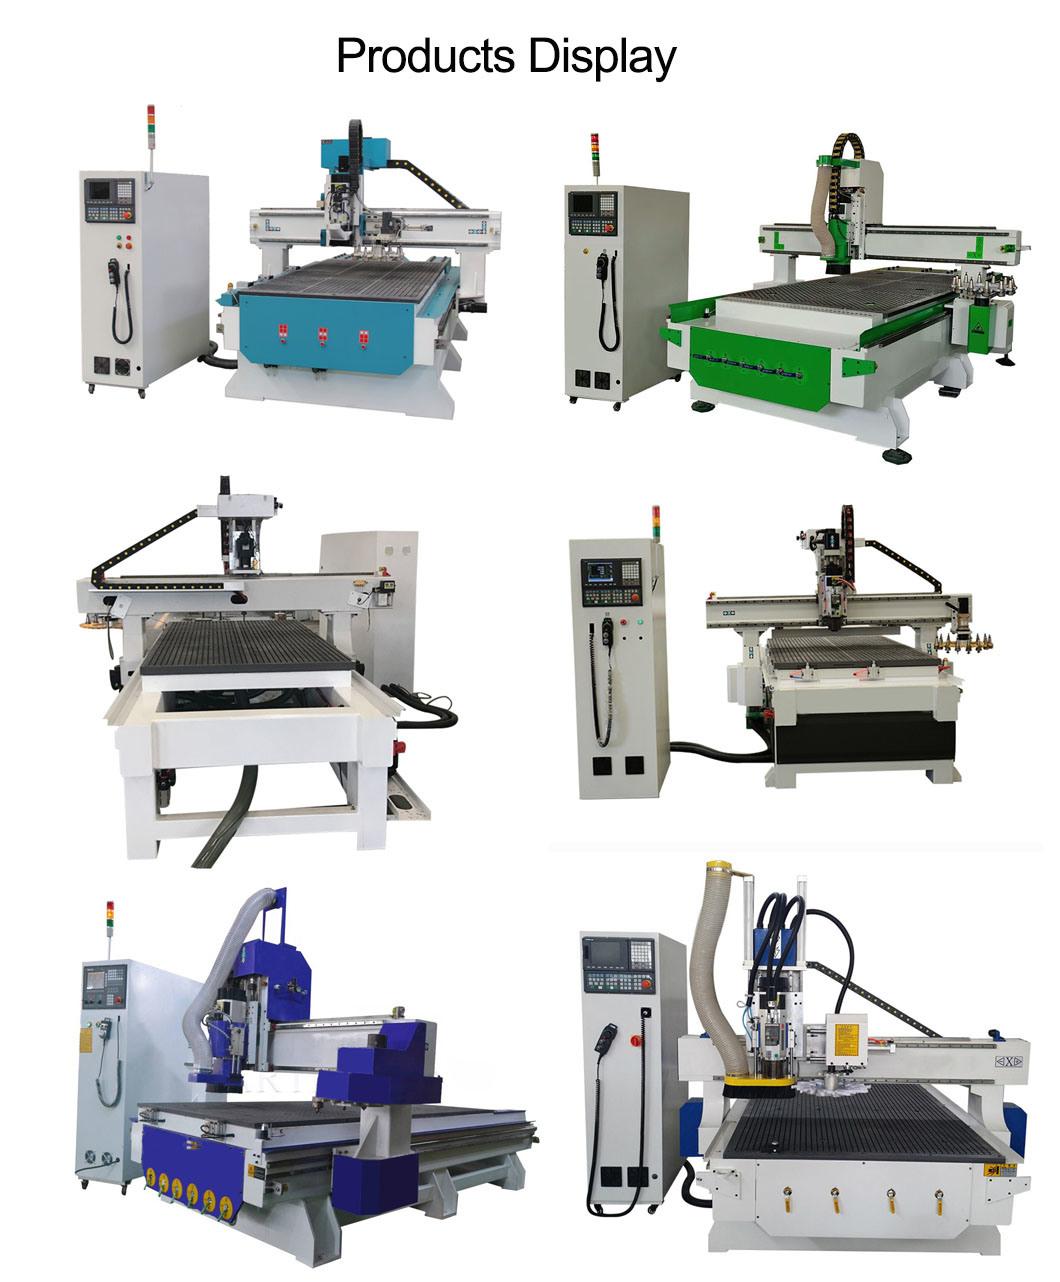 Act CNC Woodworking Router/CNC Machining Center Auto Tool Change Machine